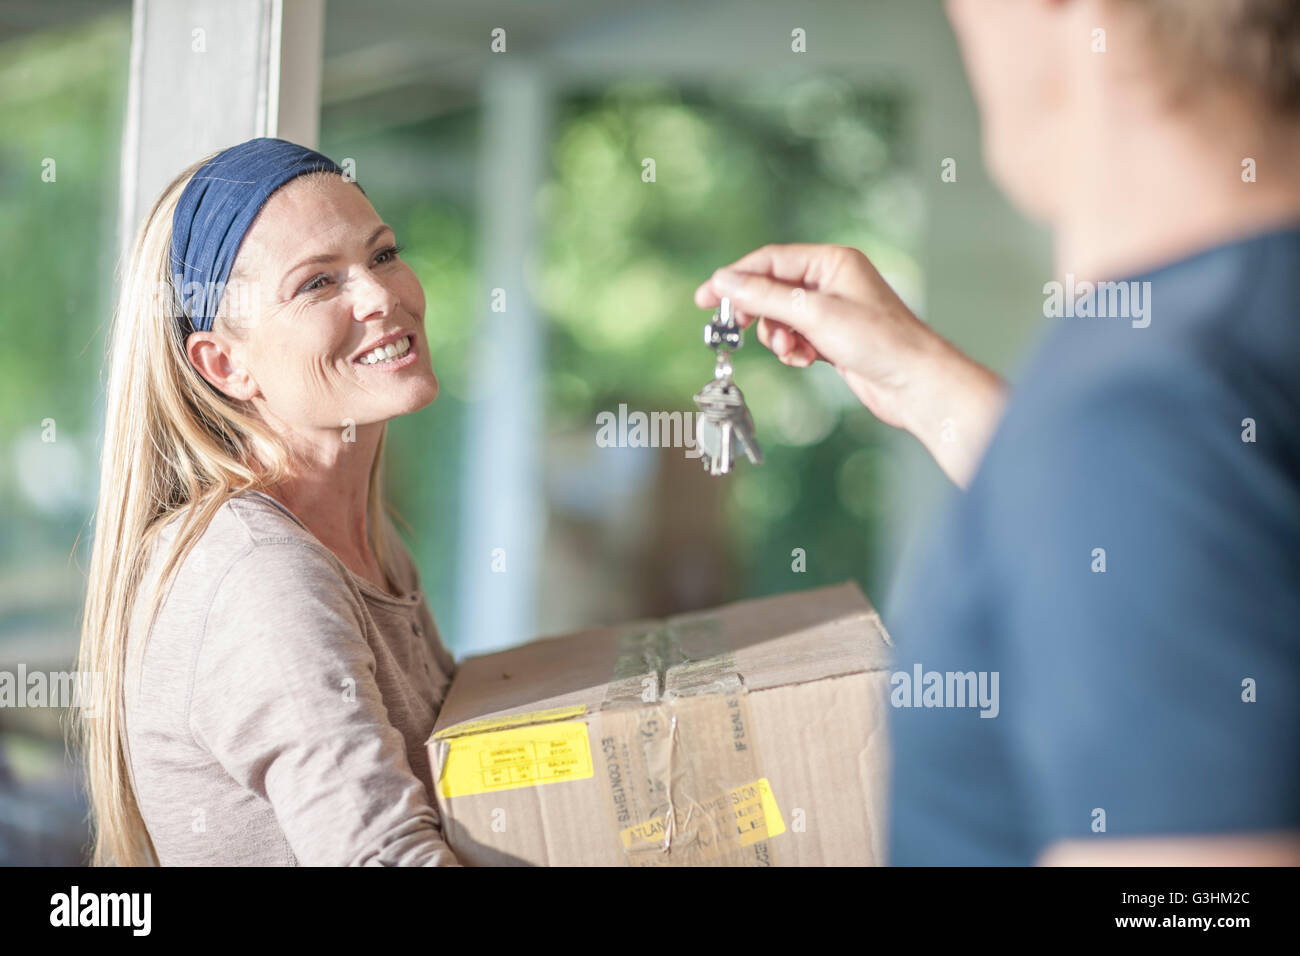 Moving house: woman carrying cardboard box, man holding house keys Stock Photo